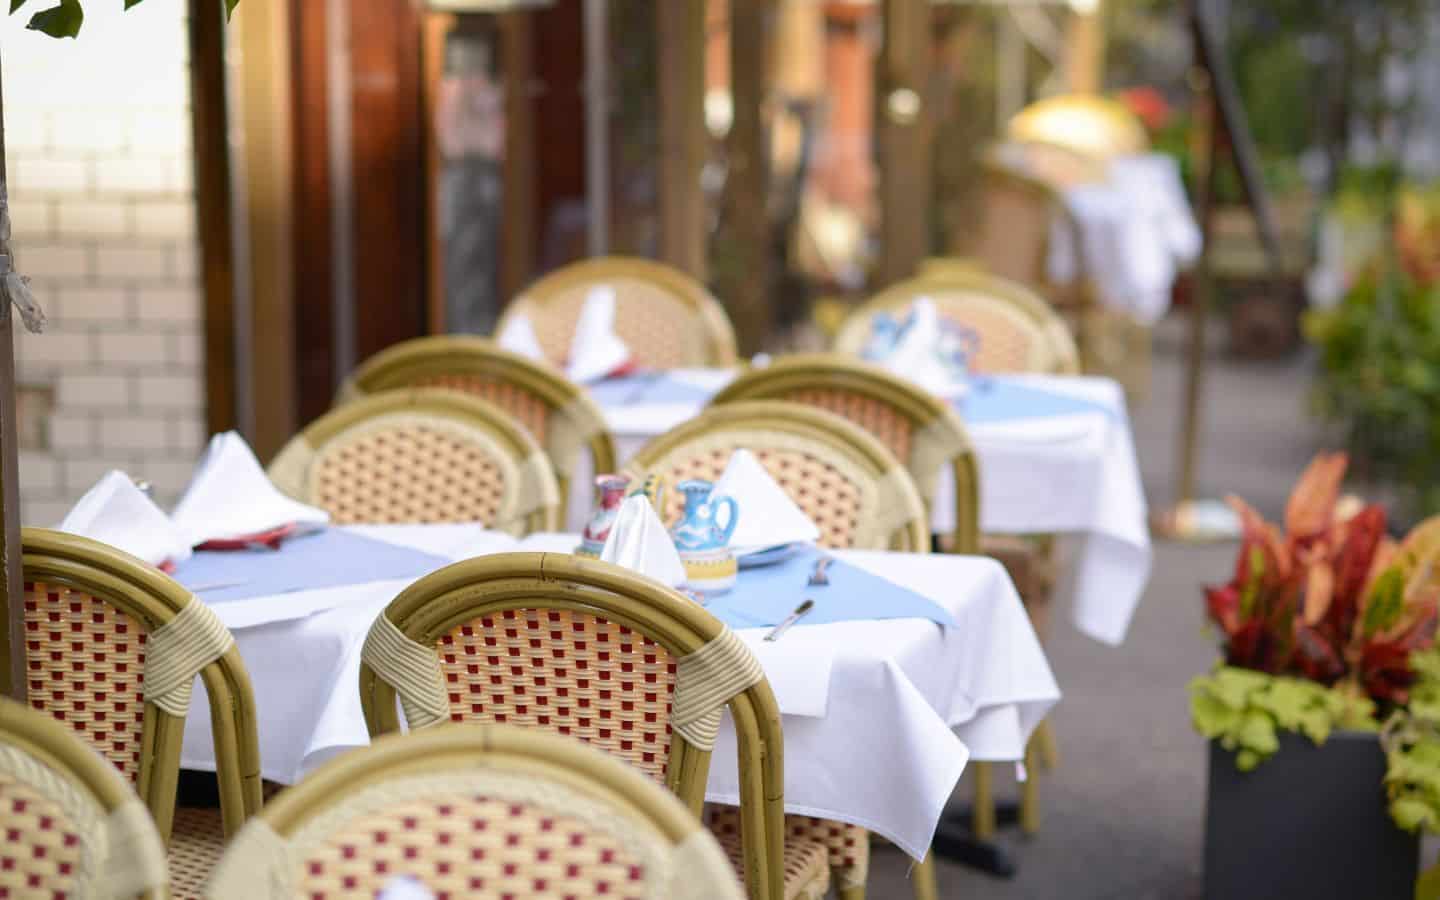 Cute wicker chairs and white linen topped tables on a sidewalk, set for dining